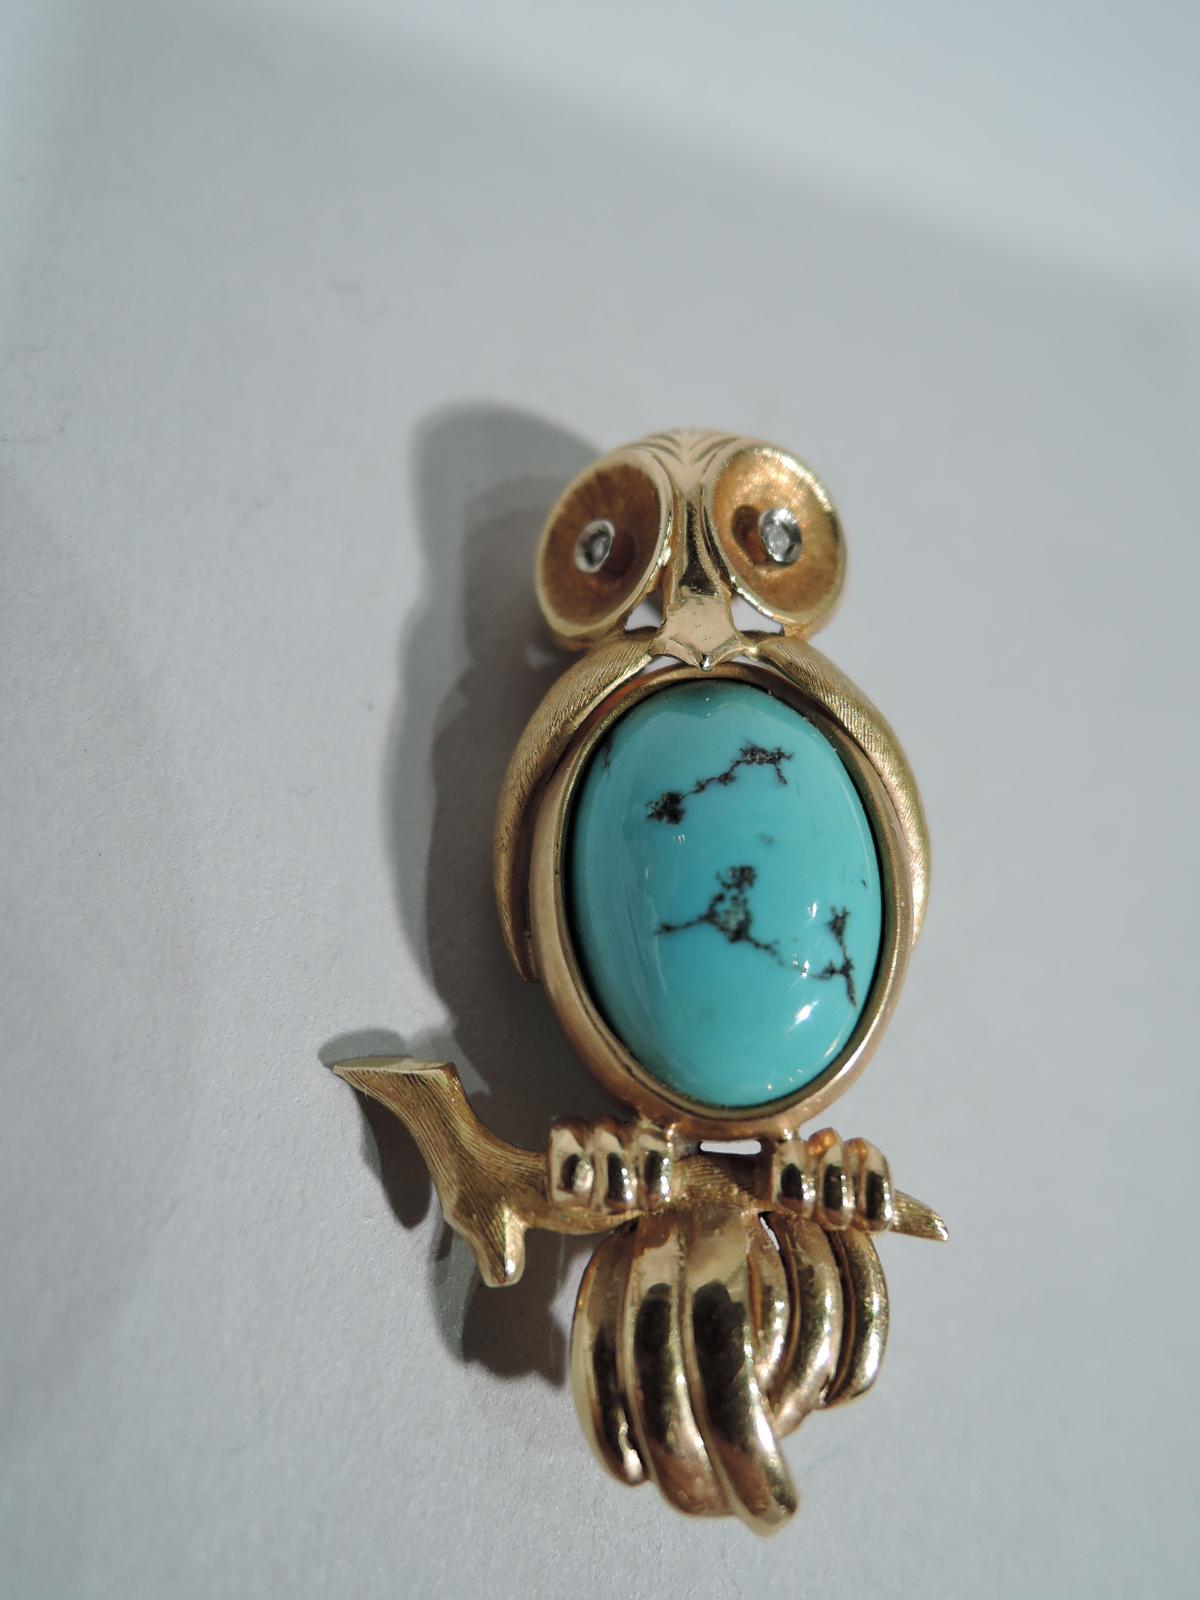 Delightful 18k gold figural pin. Stylized owl with ribbed crown, rose-diamond eyes set in concave disc sockets, sweet wing flaps, and branch-gripped talons. Breast inset with turquoise stone. A symbol of wisdom in the advanced taste. United states,